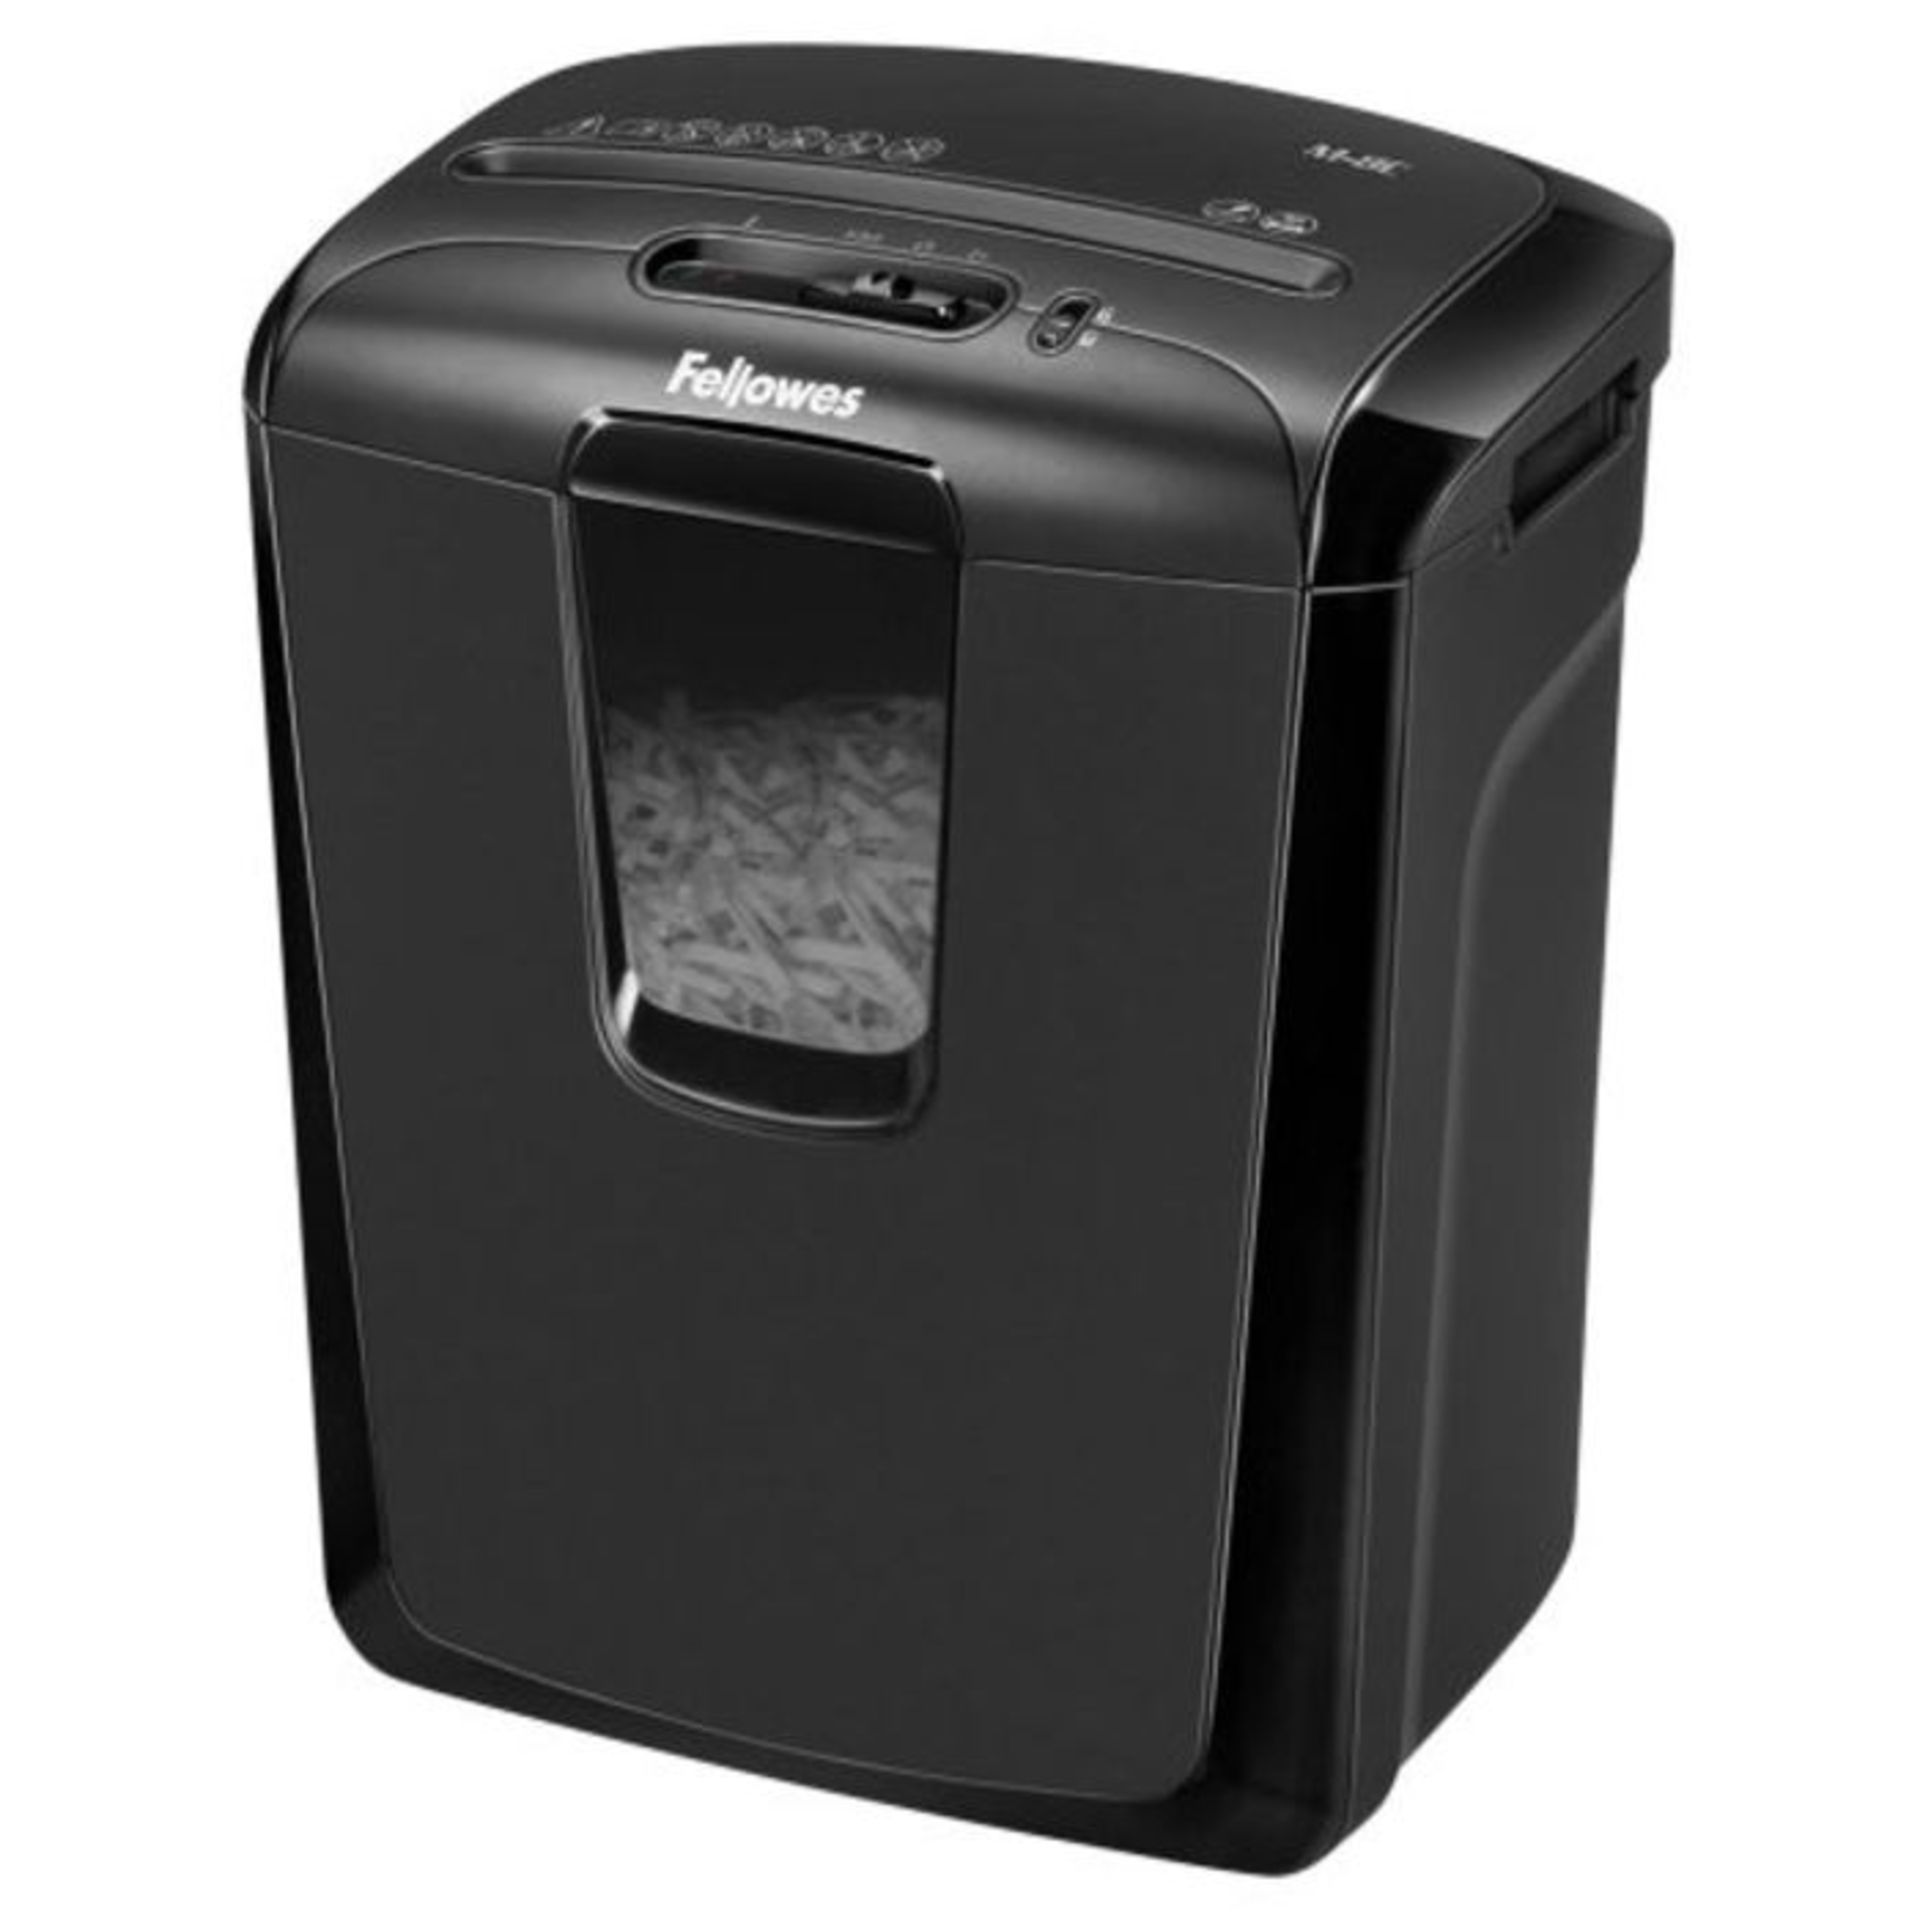 Fellowes Powershred M-8C 8 Sheet Cross Cut Personal Shredder with Safety Lock - Image 4 of 6